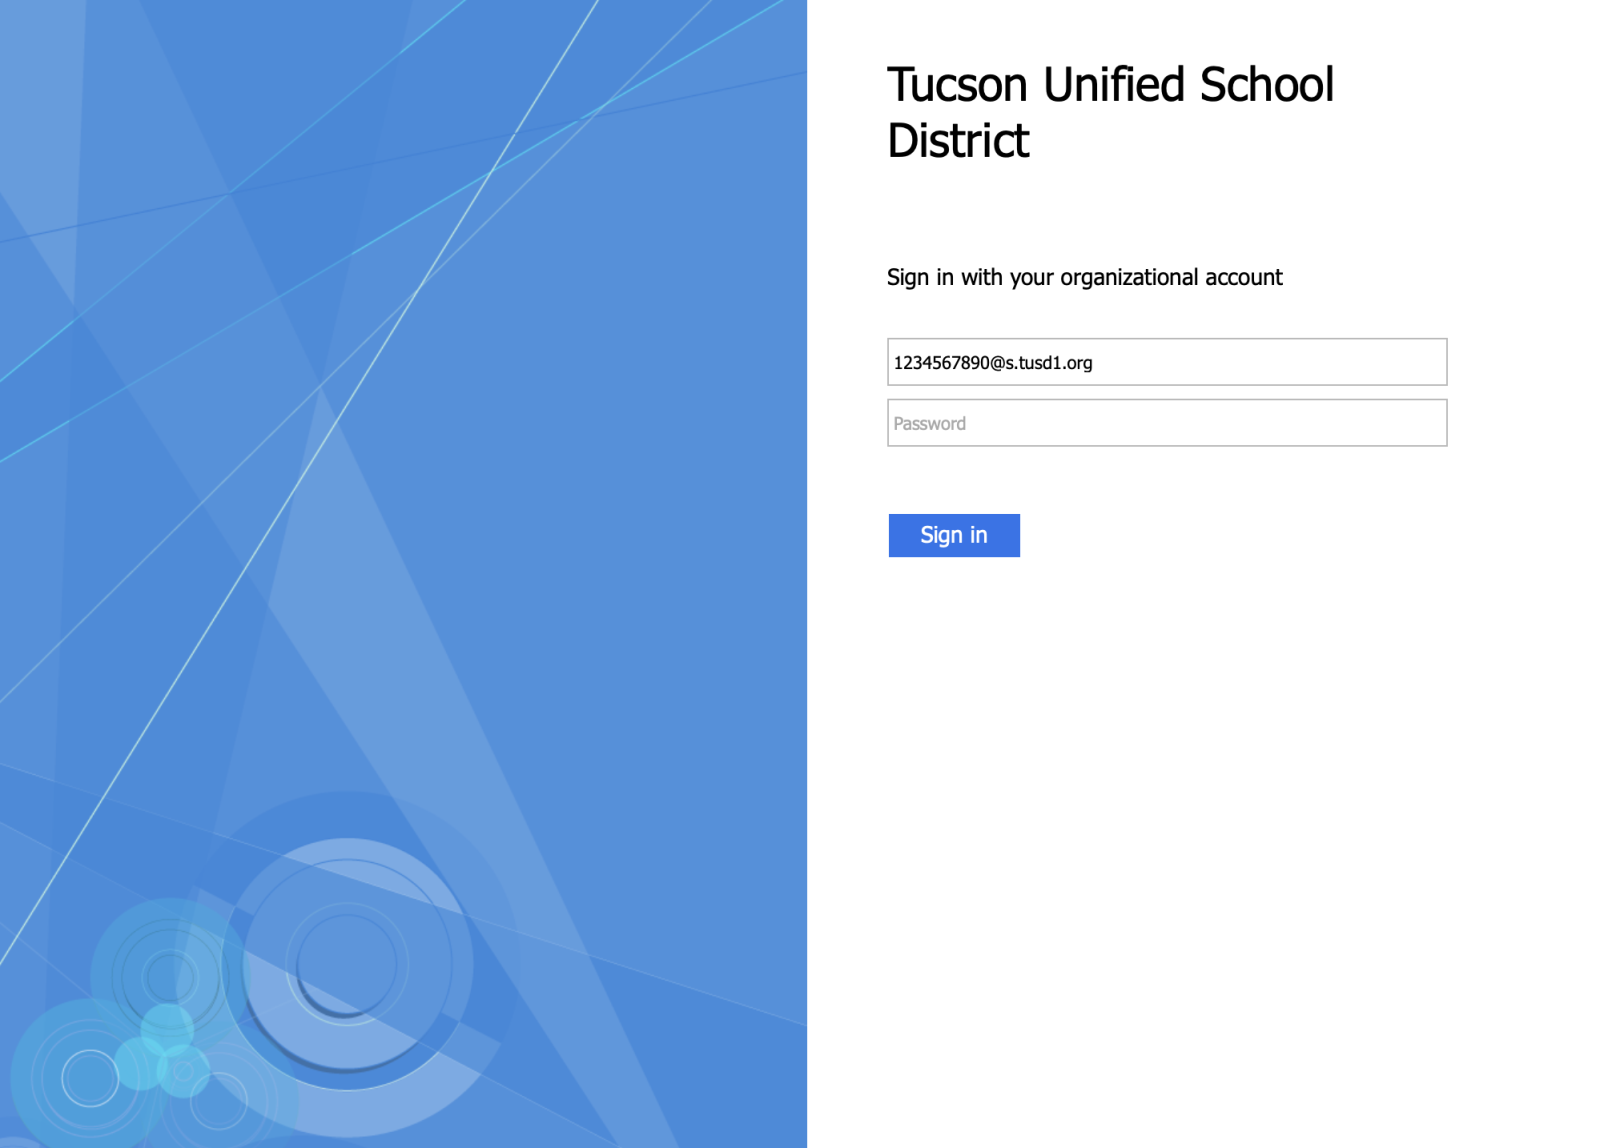 TUSD sign in page